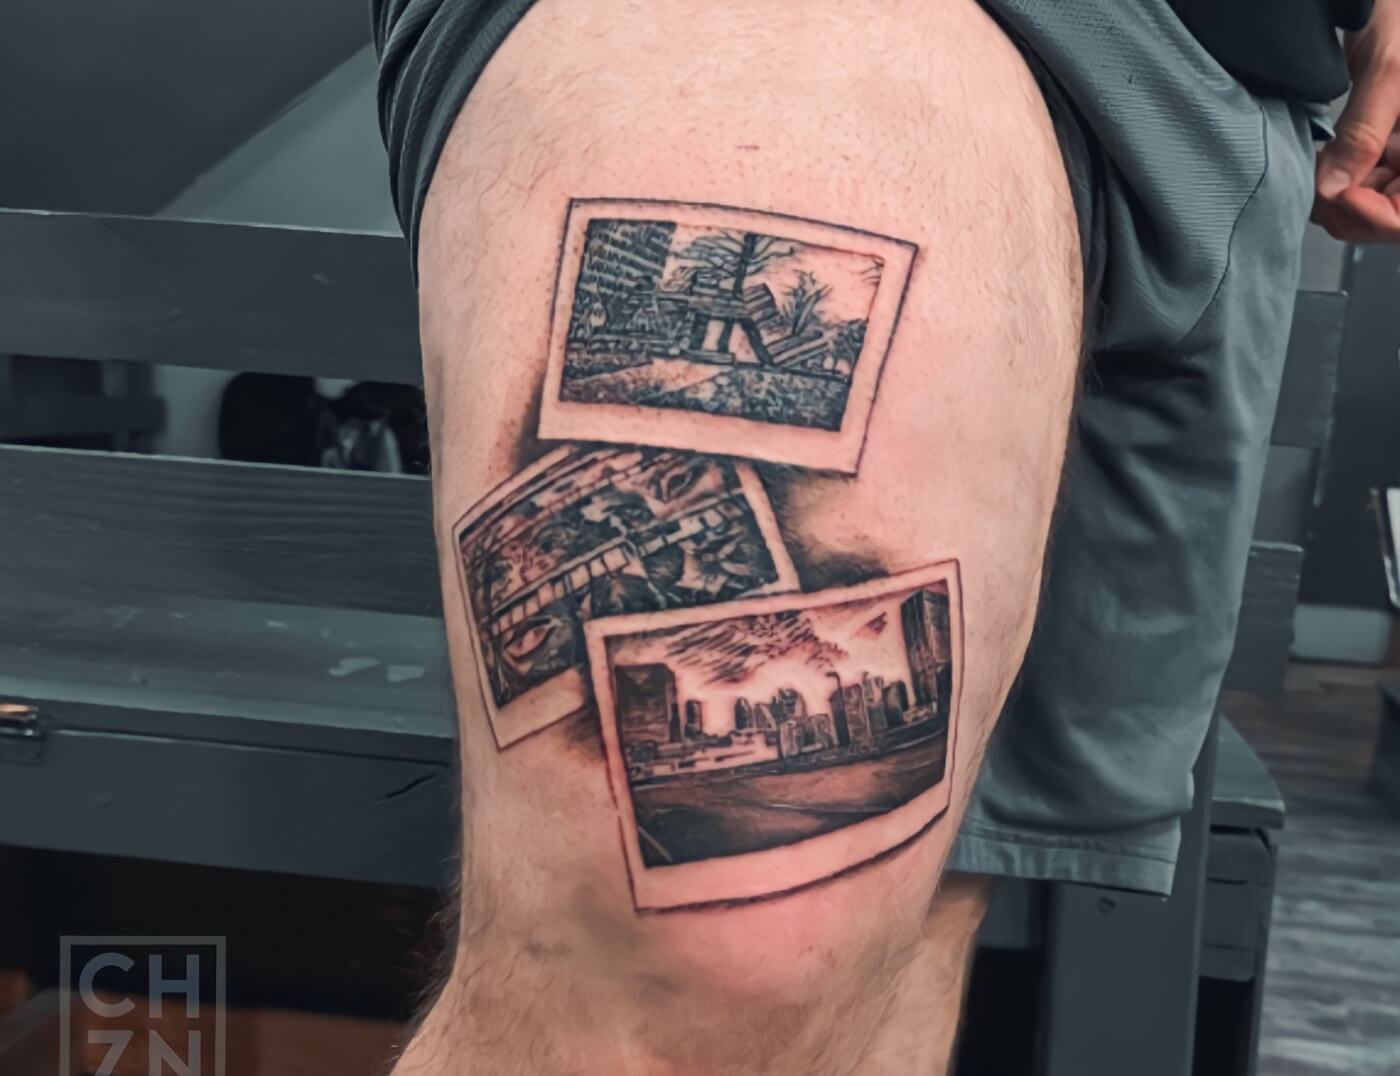 A landscape photographer brought his favorite photographs in for Choze to tattoo onto his leg. Choze did them in black & grey. Lovely photos. Amazingly detailed ink of the actual images. Call 404-973-7828 or stop by for a free consultations. We are open late night most nights until 2AM. Walk Ins are welcome.